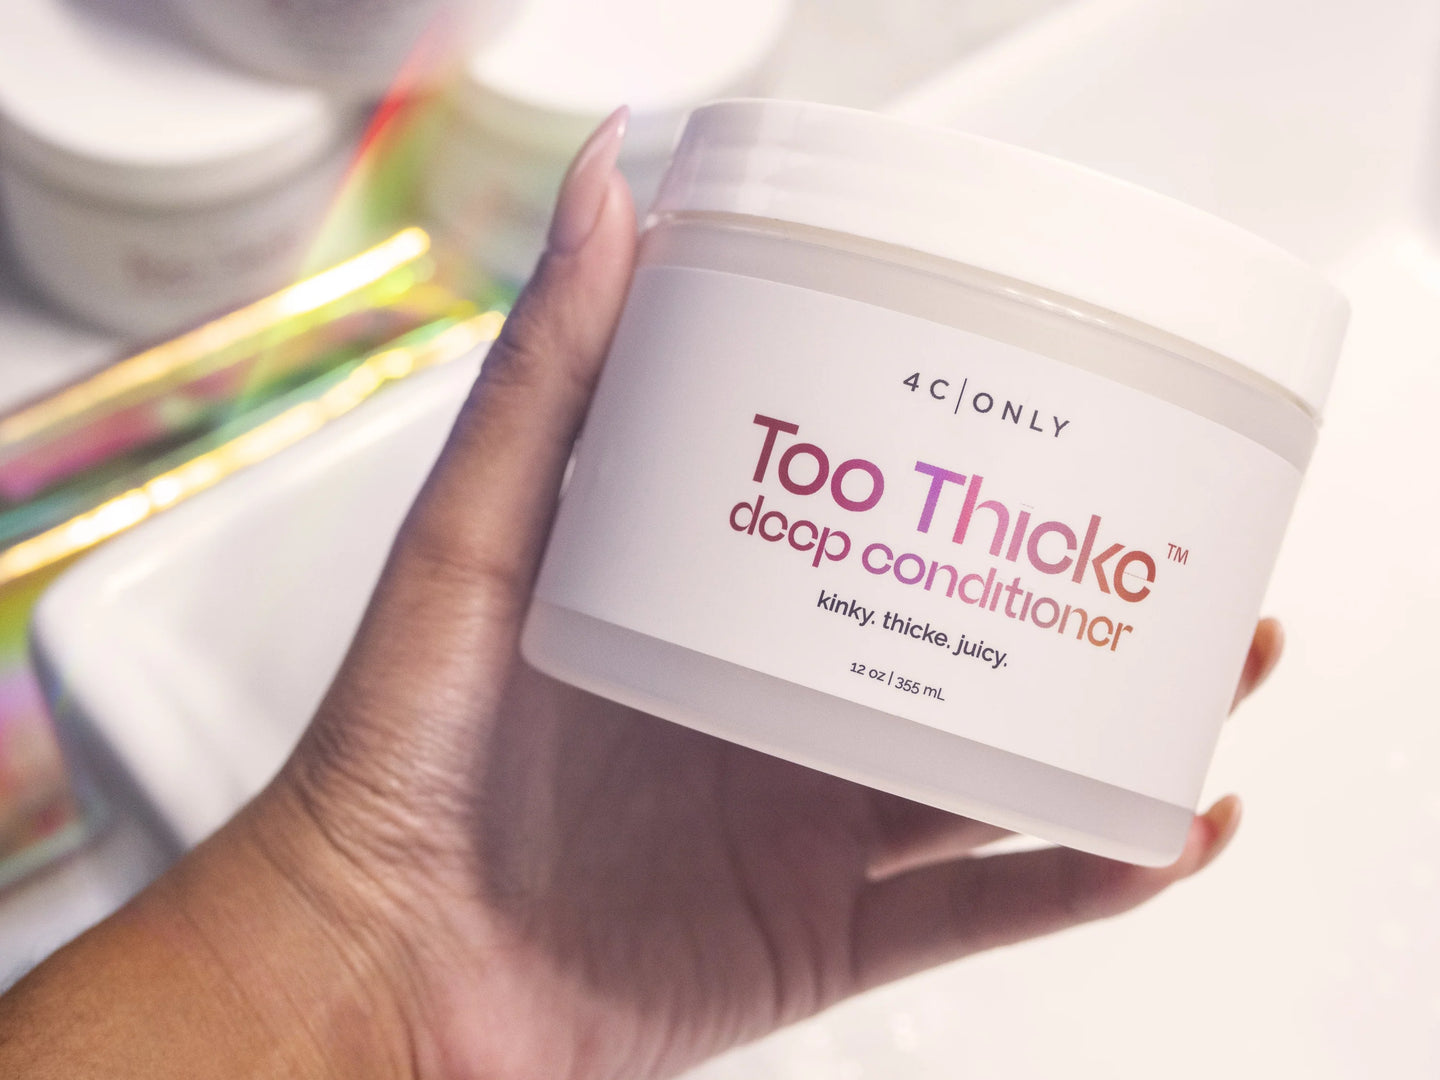 4c only too thicke deep conditioner